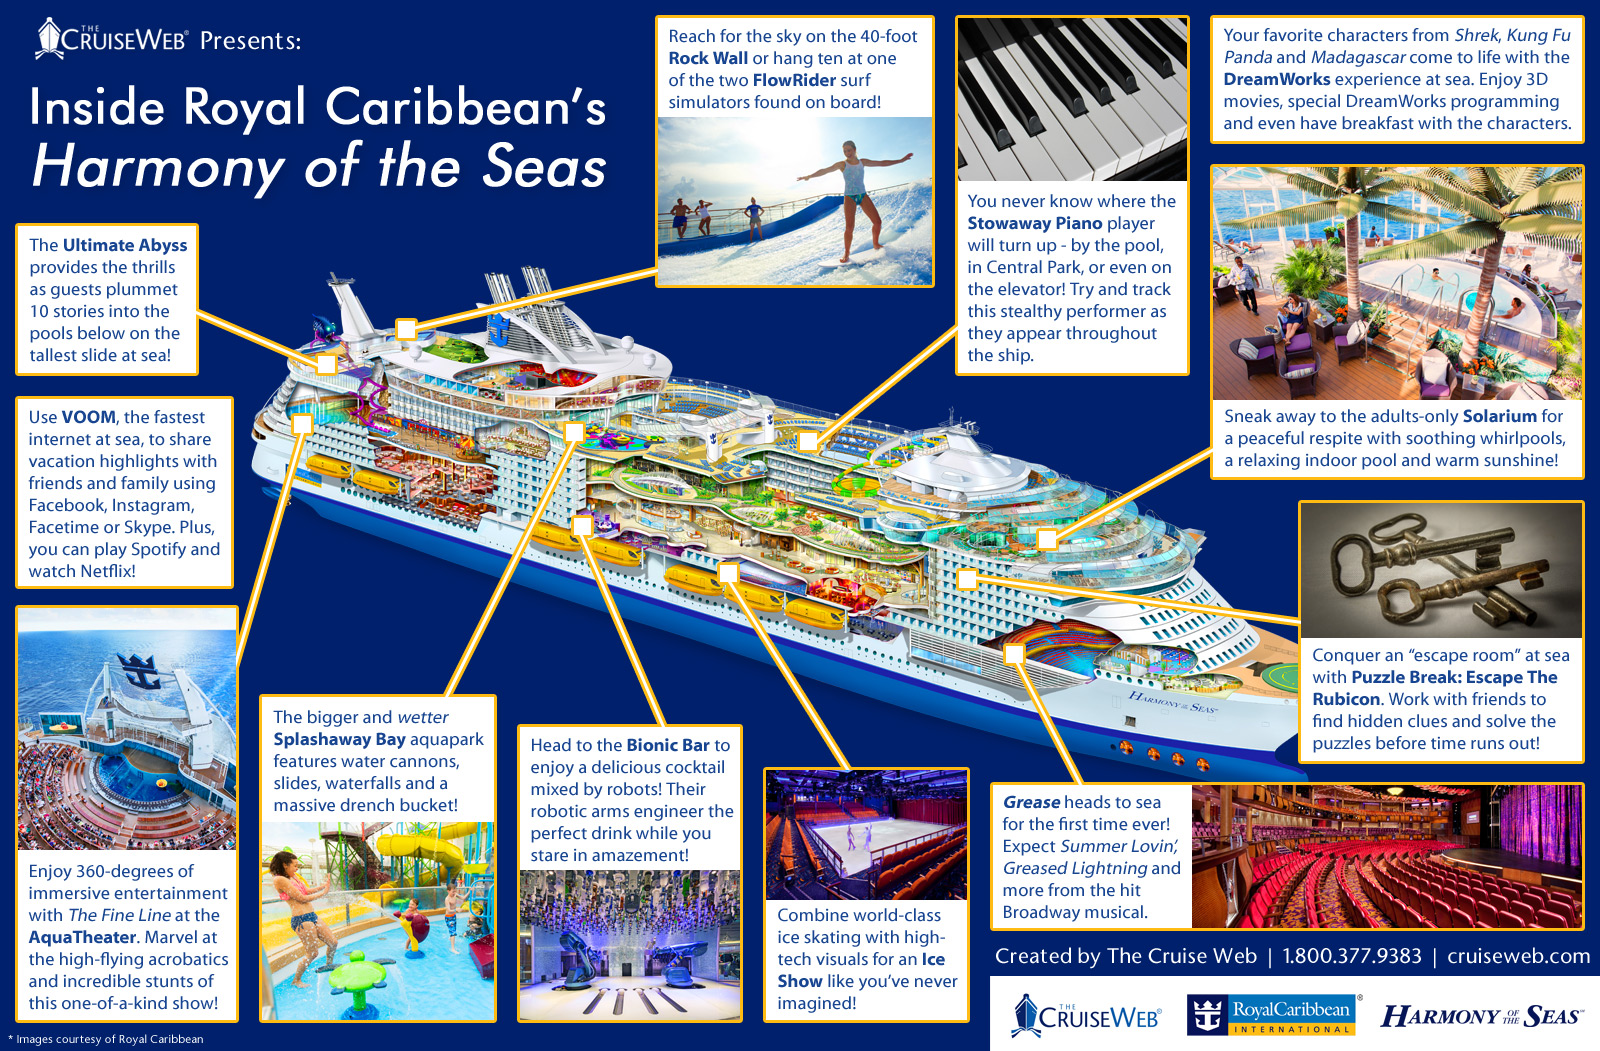 The Cruise Web Reveals Royal Caribbean’s New Harmony of the Seas in